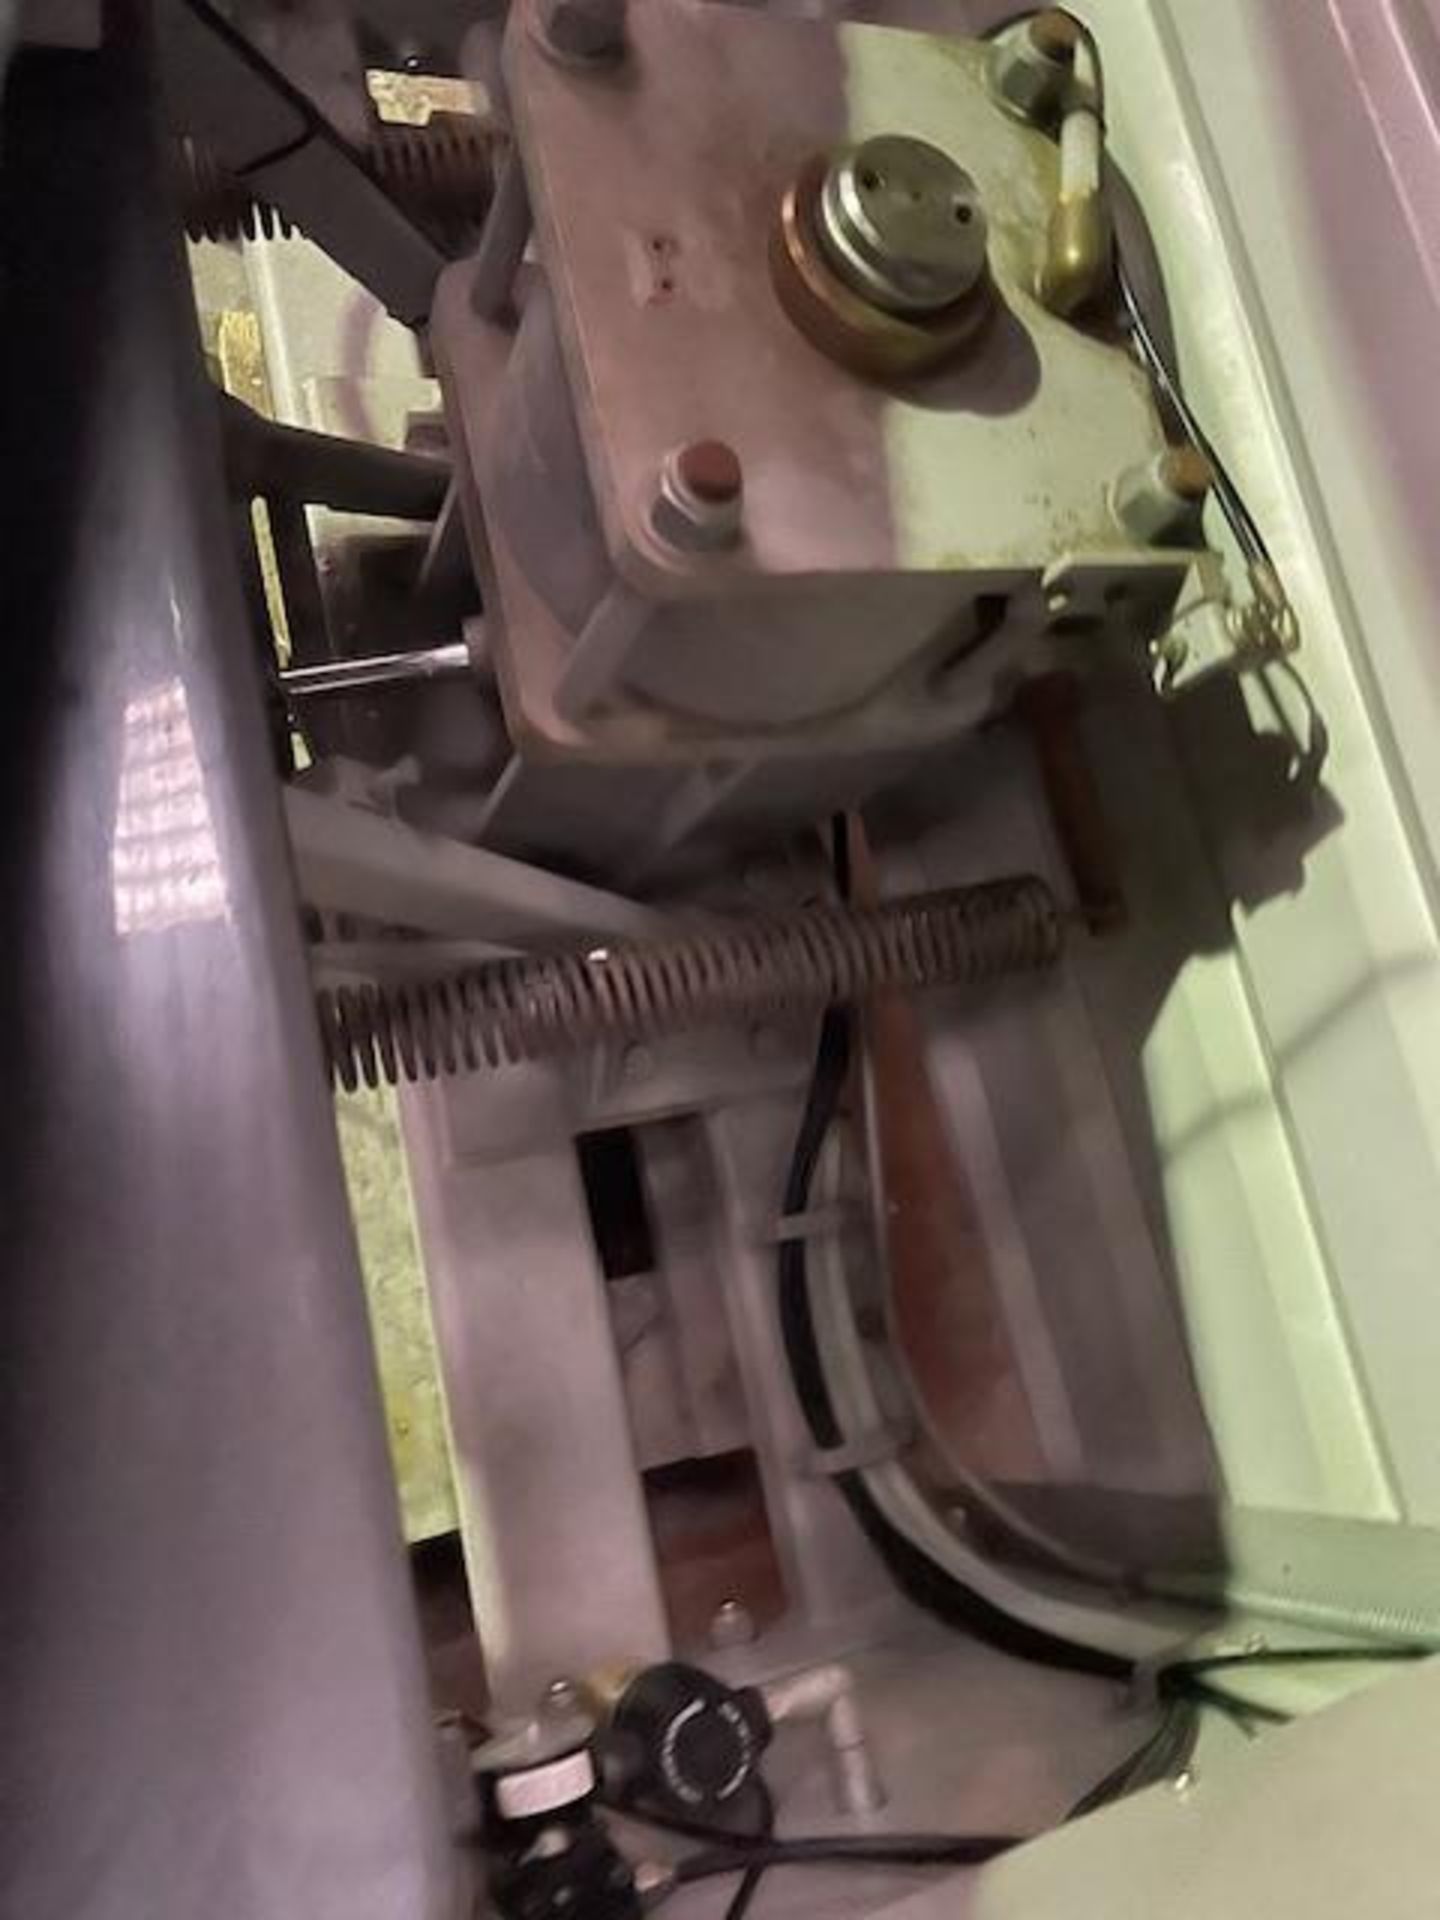 Laundry press it’s a BMM Weston it’s 3 phase electric it’s in good condition and it’s a commercial - Image 5 of 7